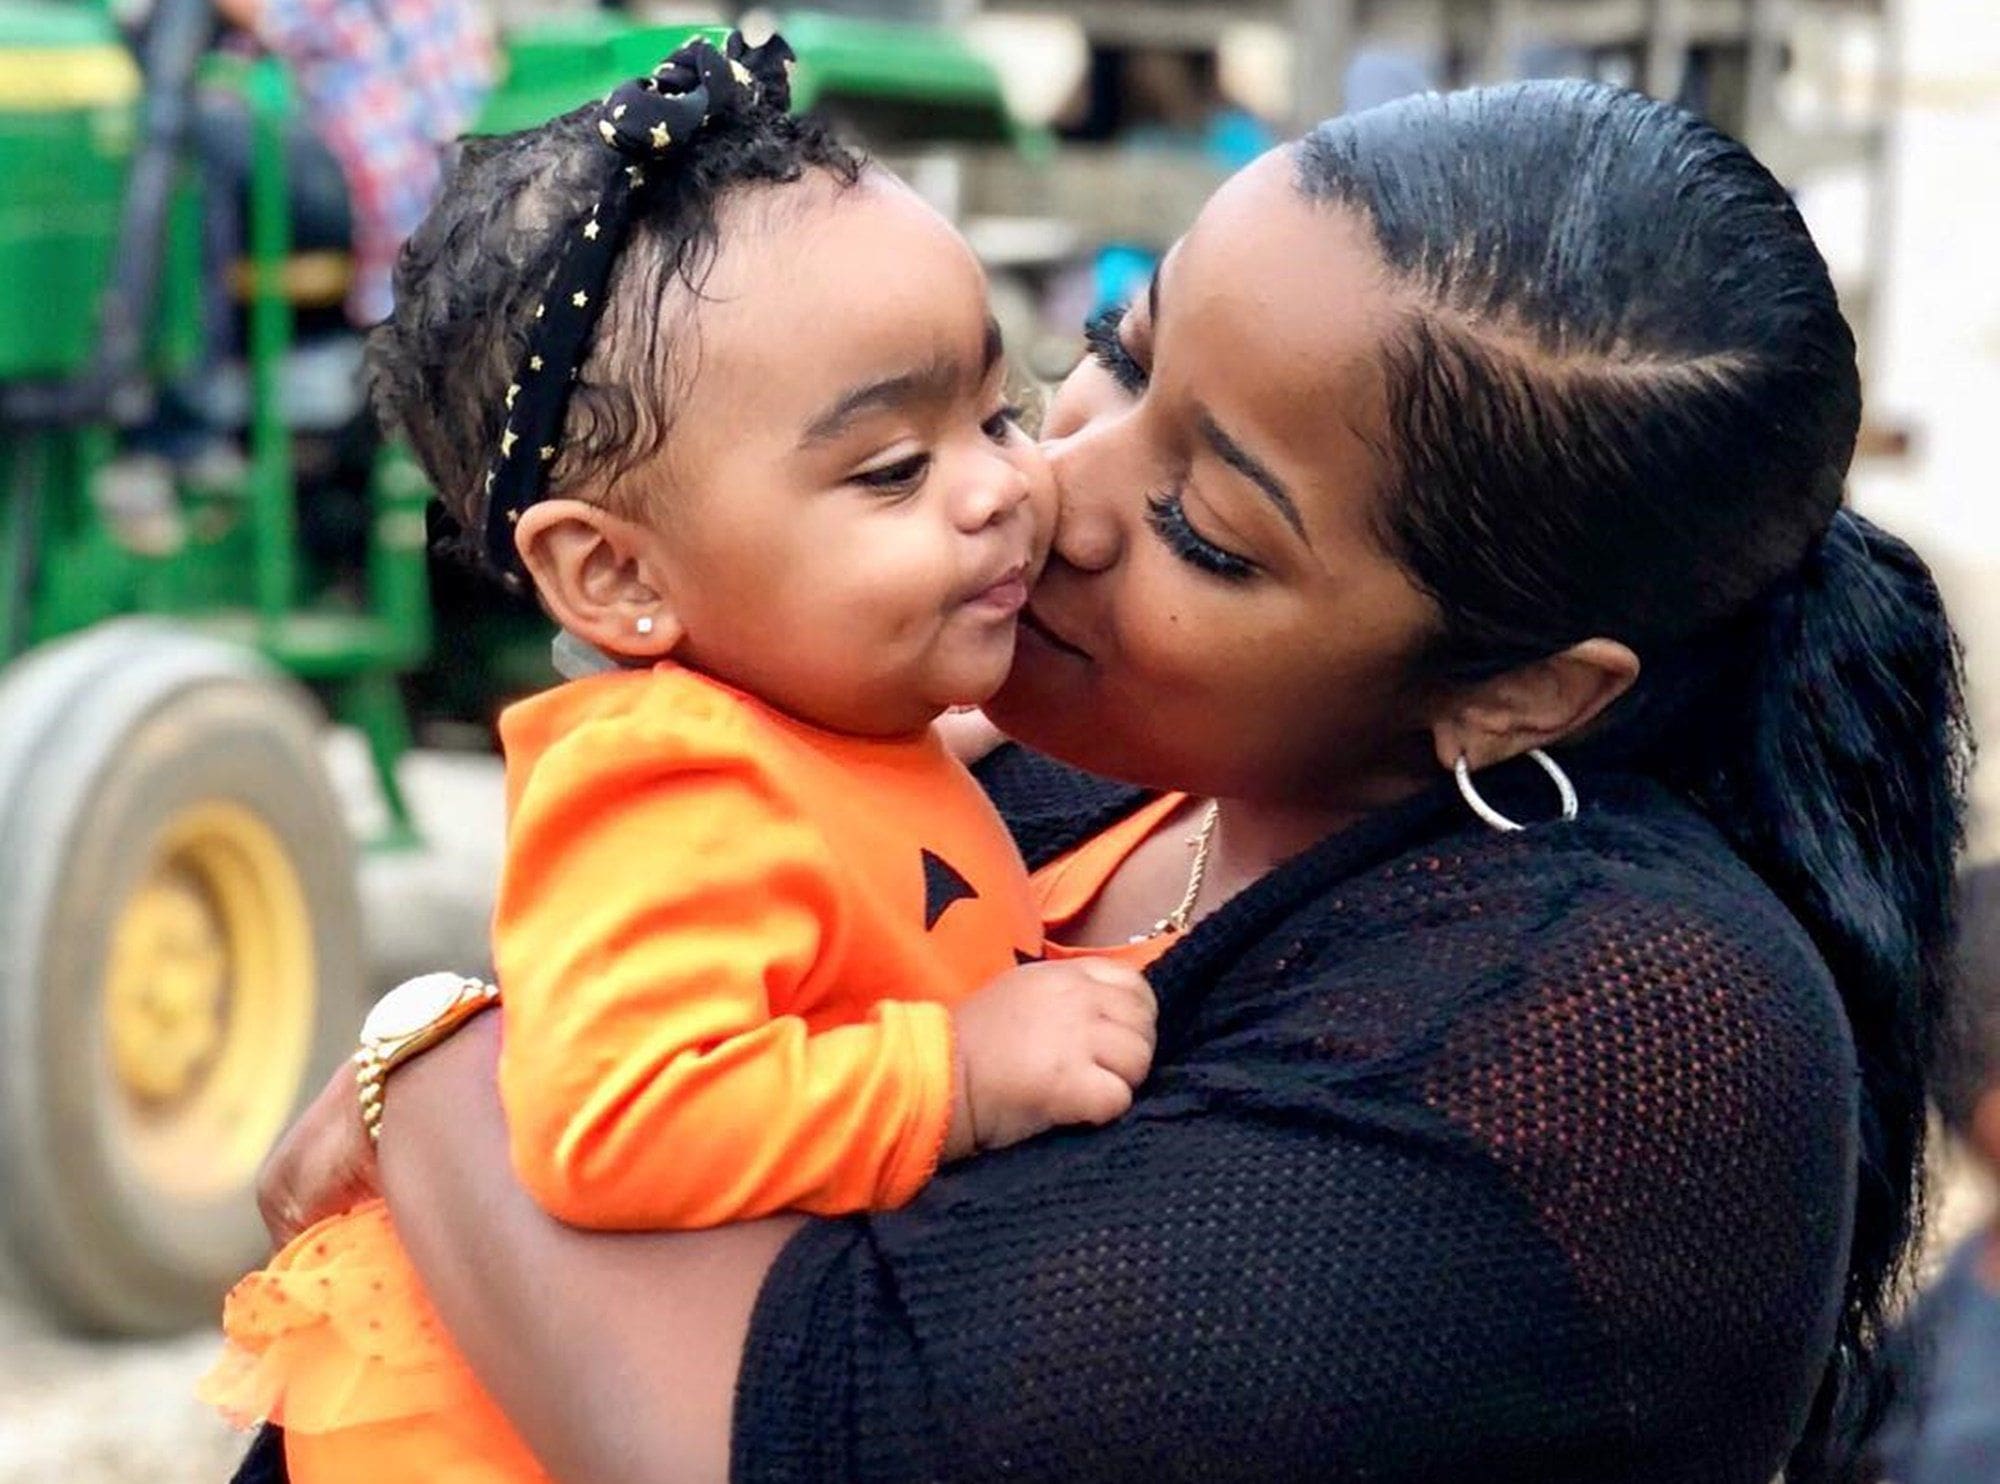 Toya Johnson Shares New Clips Featuring Baby Reign Rushing And Makes Fans' Day